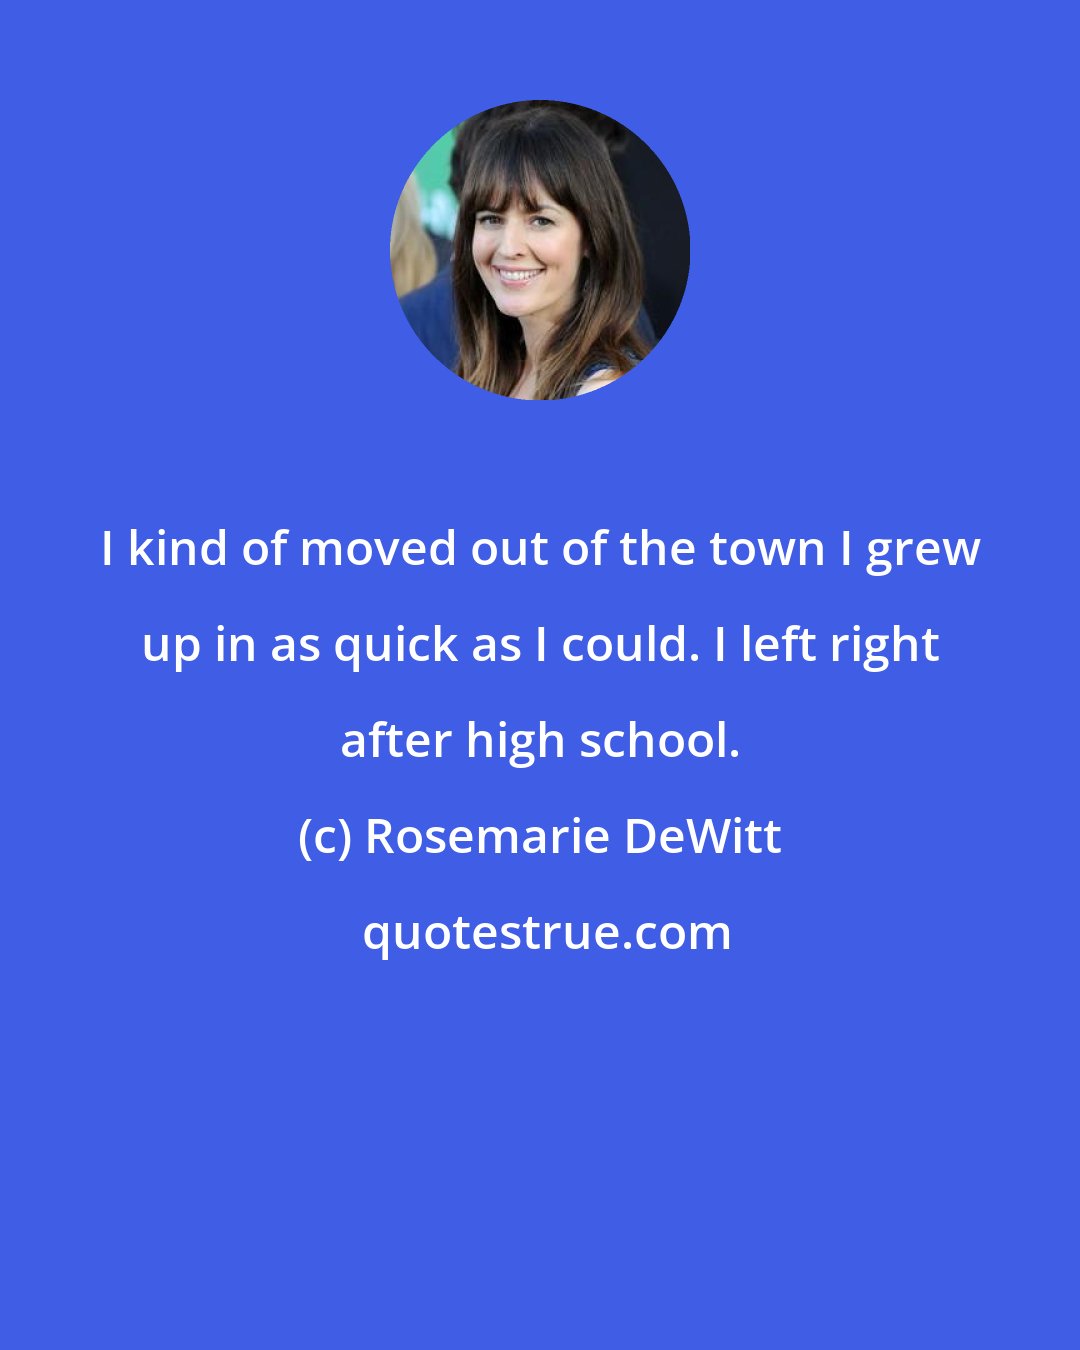 Rosemarie DeWitt: I kind of moved out of the town I grew up in as quick as I could. I left right after high school.